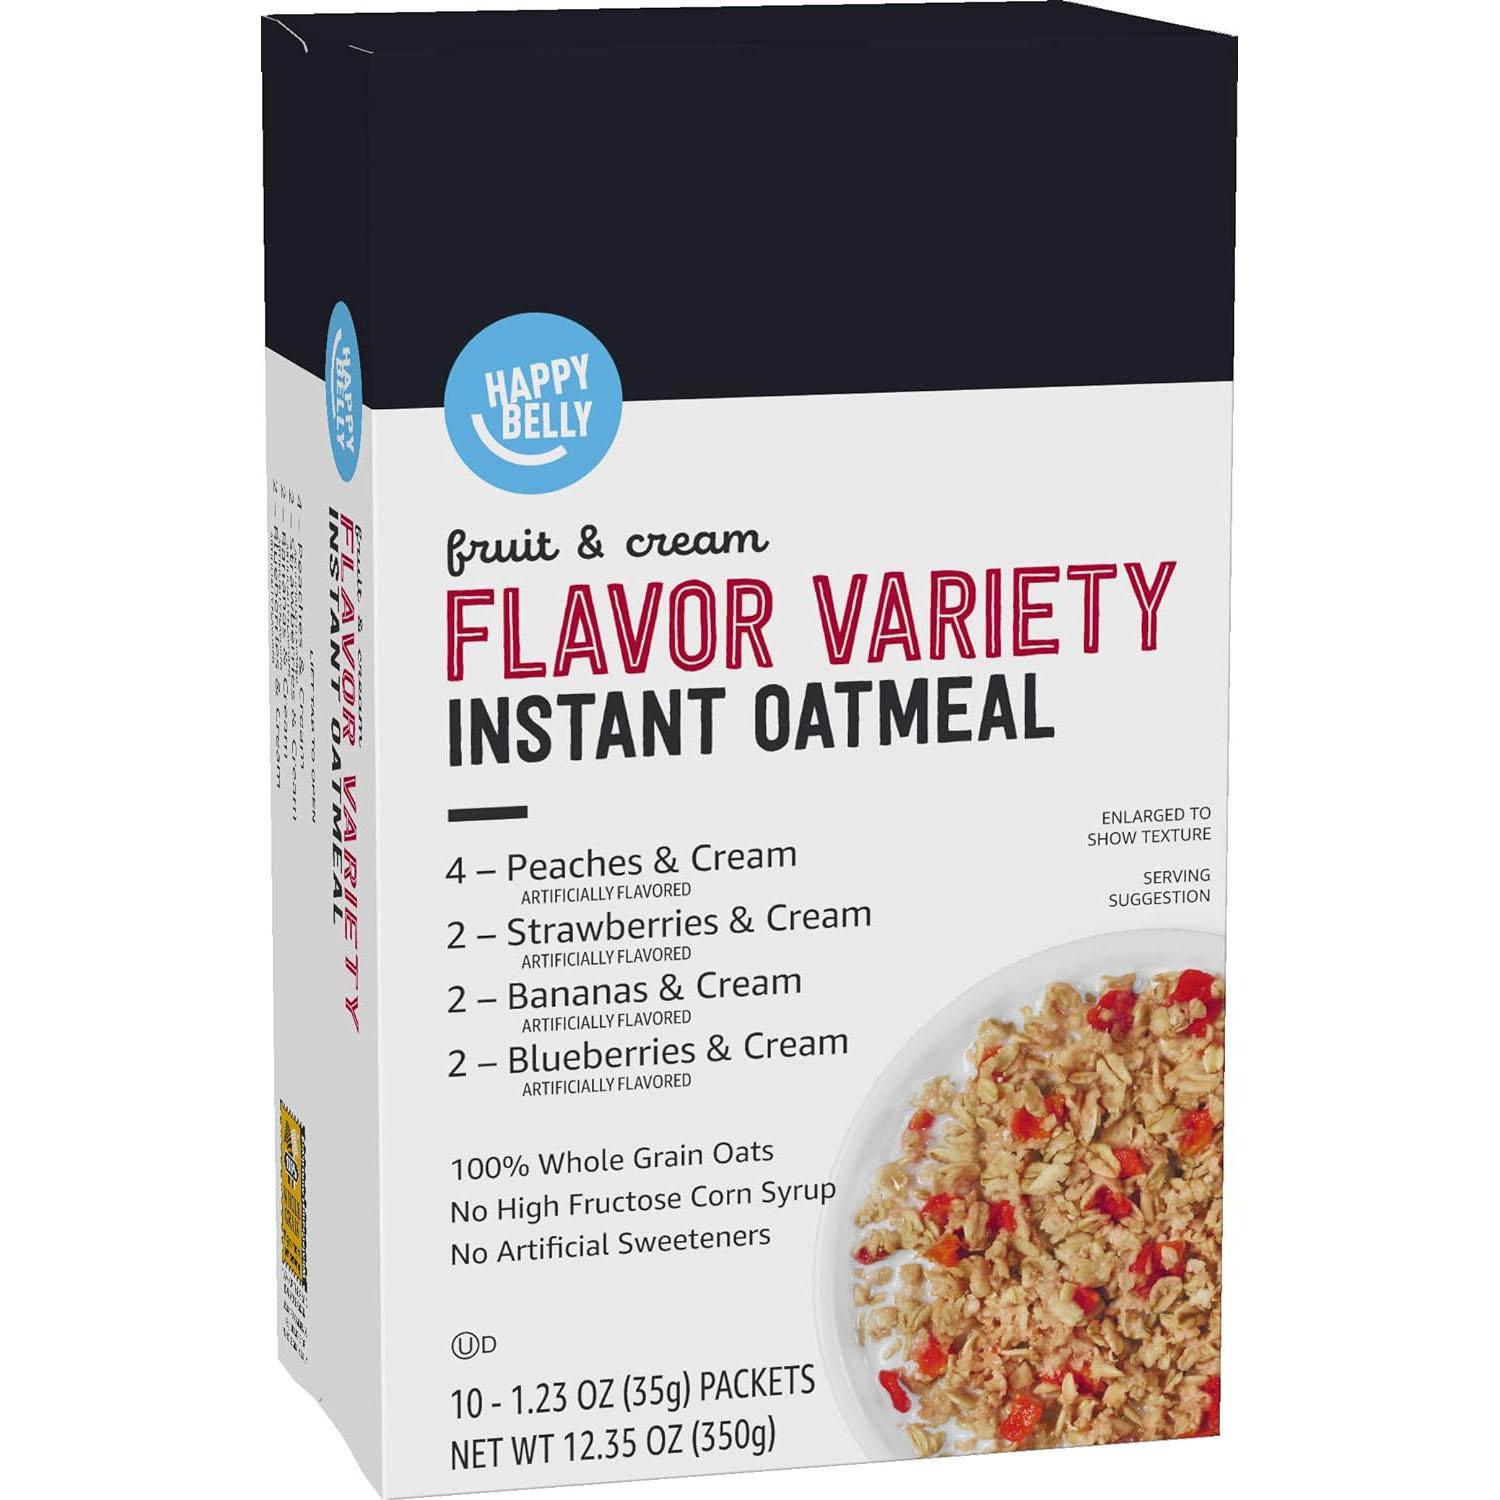 Happy Belly Instant Oatmeal Fruit and Cream Variety Packets 10 Pack for $1.65 Shipped